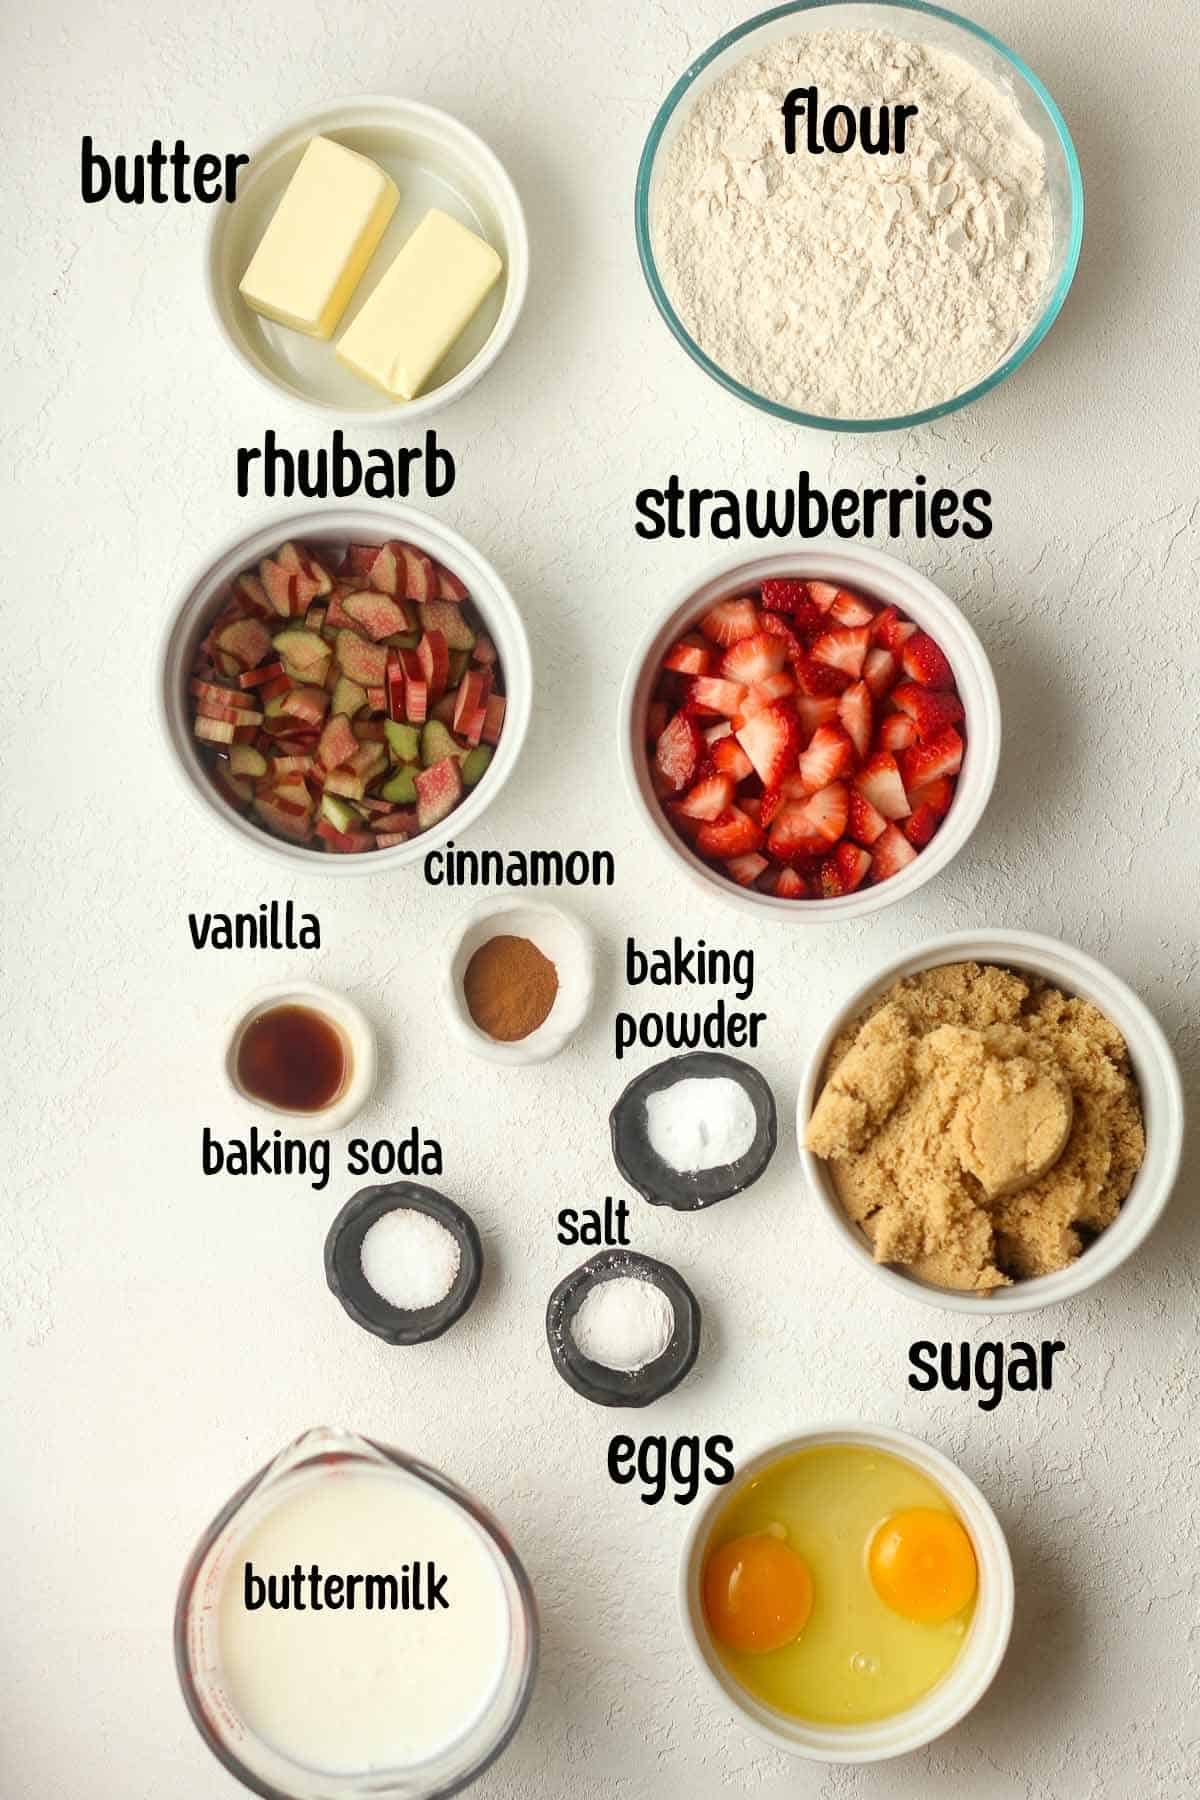 The muffin ingredients with labels.